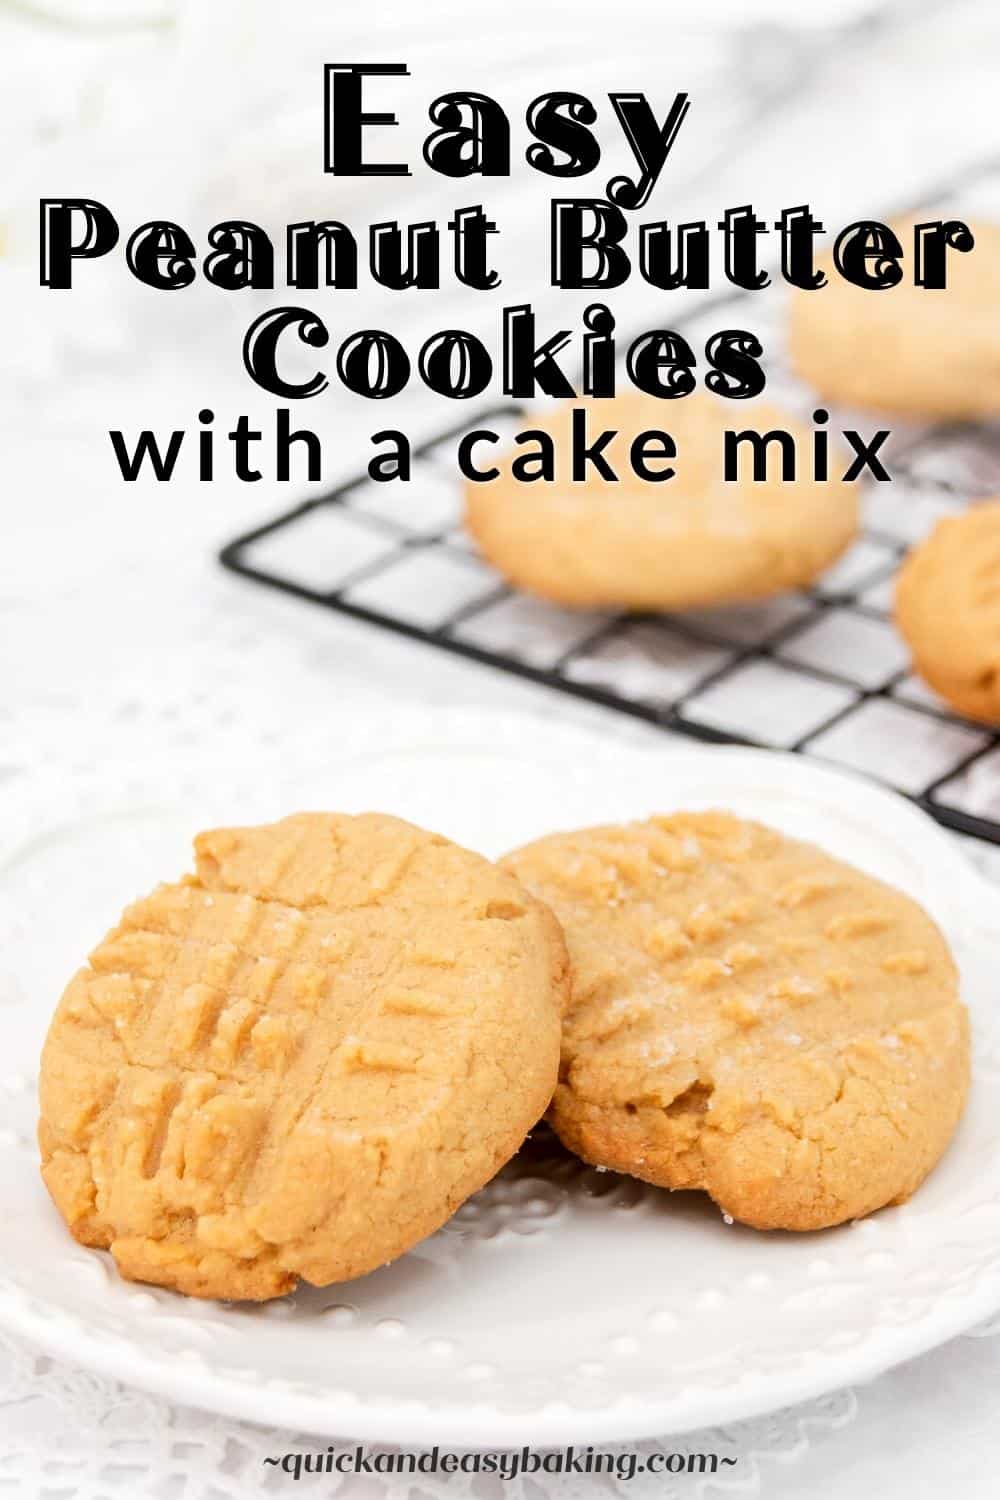 Soft cake mix peanut butter cookies on a plate with text pin 1.